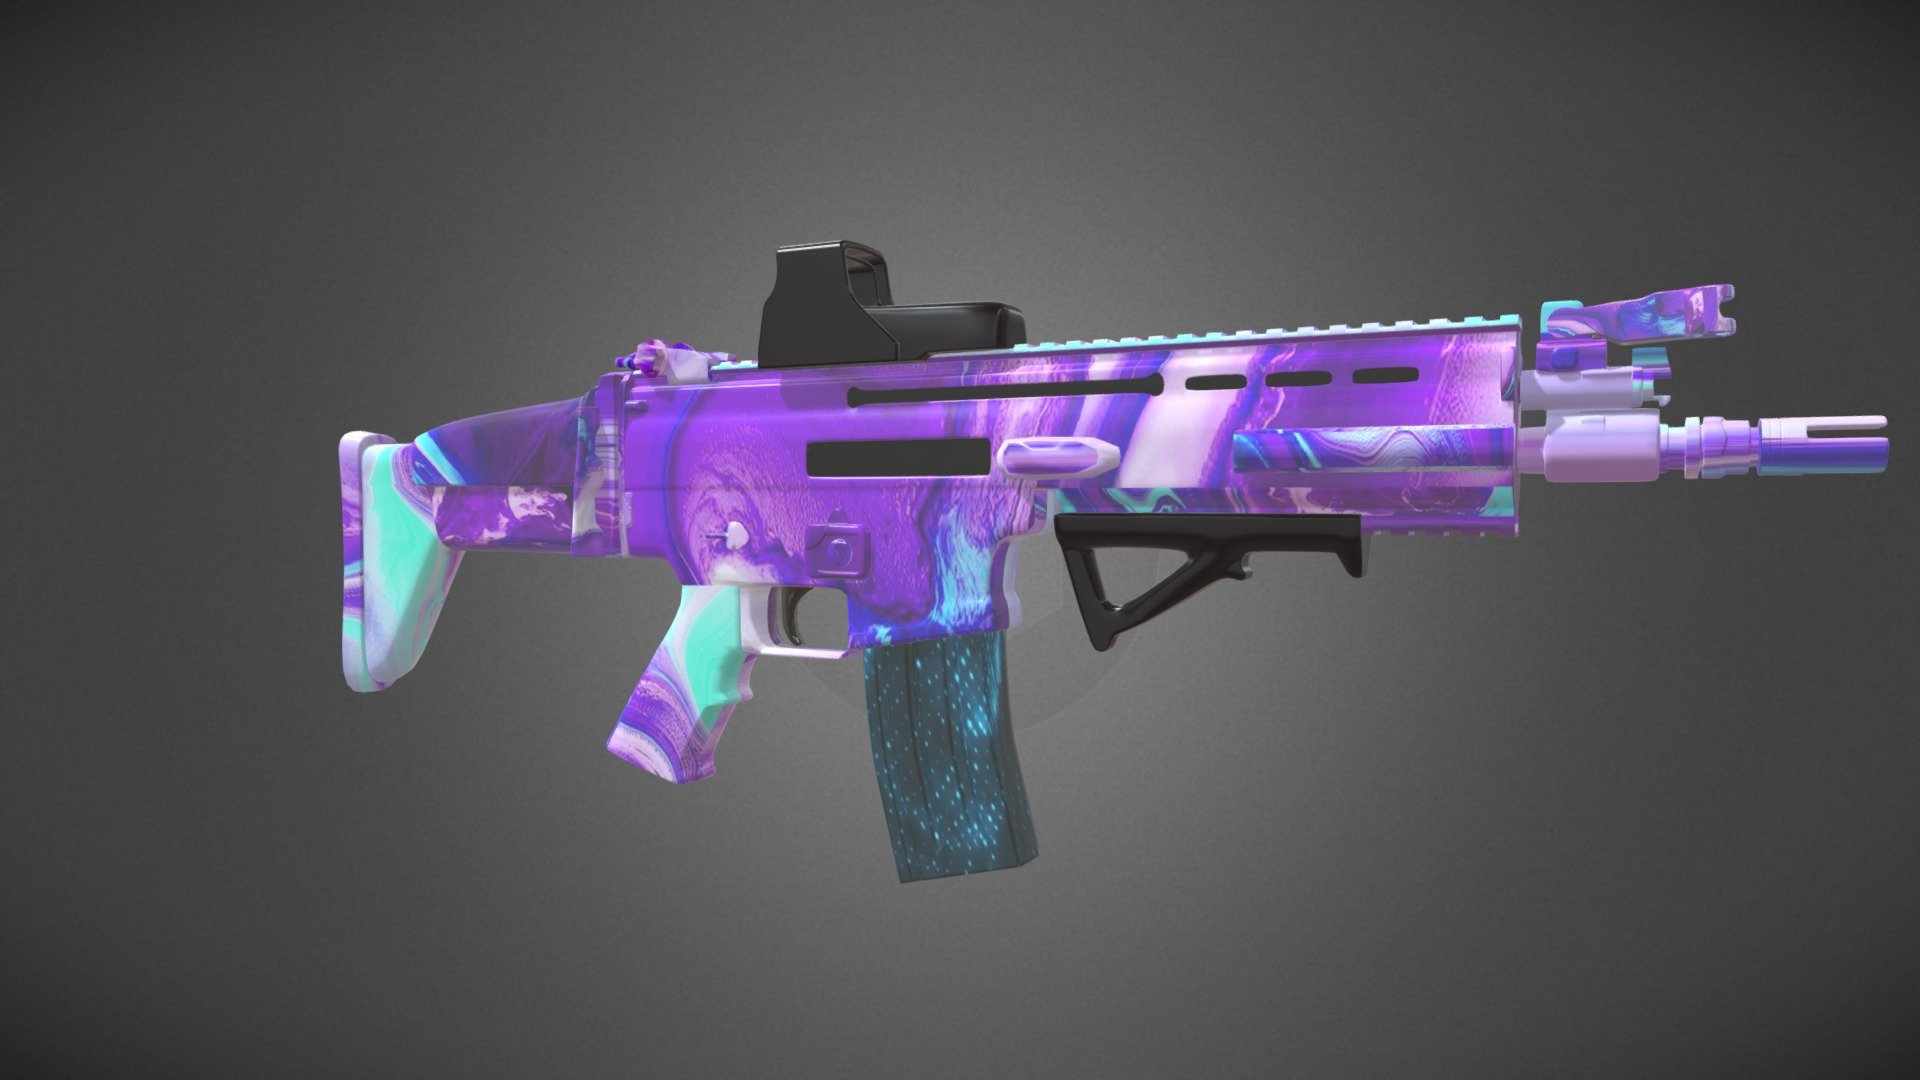 Scar L Water Blaster Holographic Sight Download Free 3d Model By Abhay Singh Beagamer 8d857d1